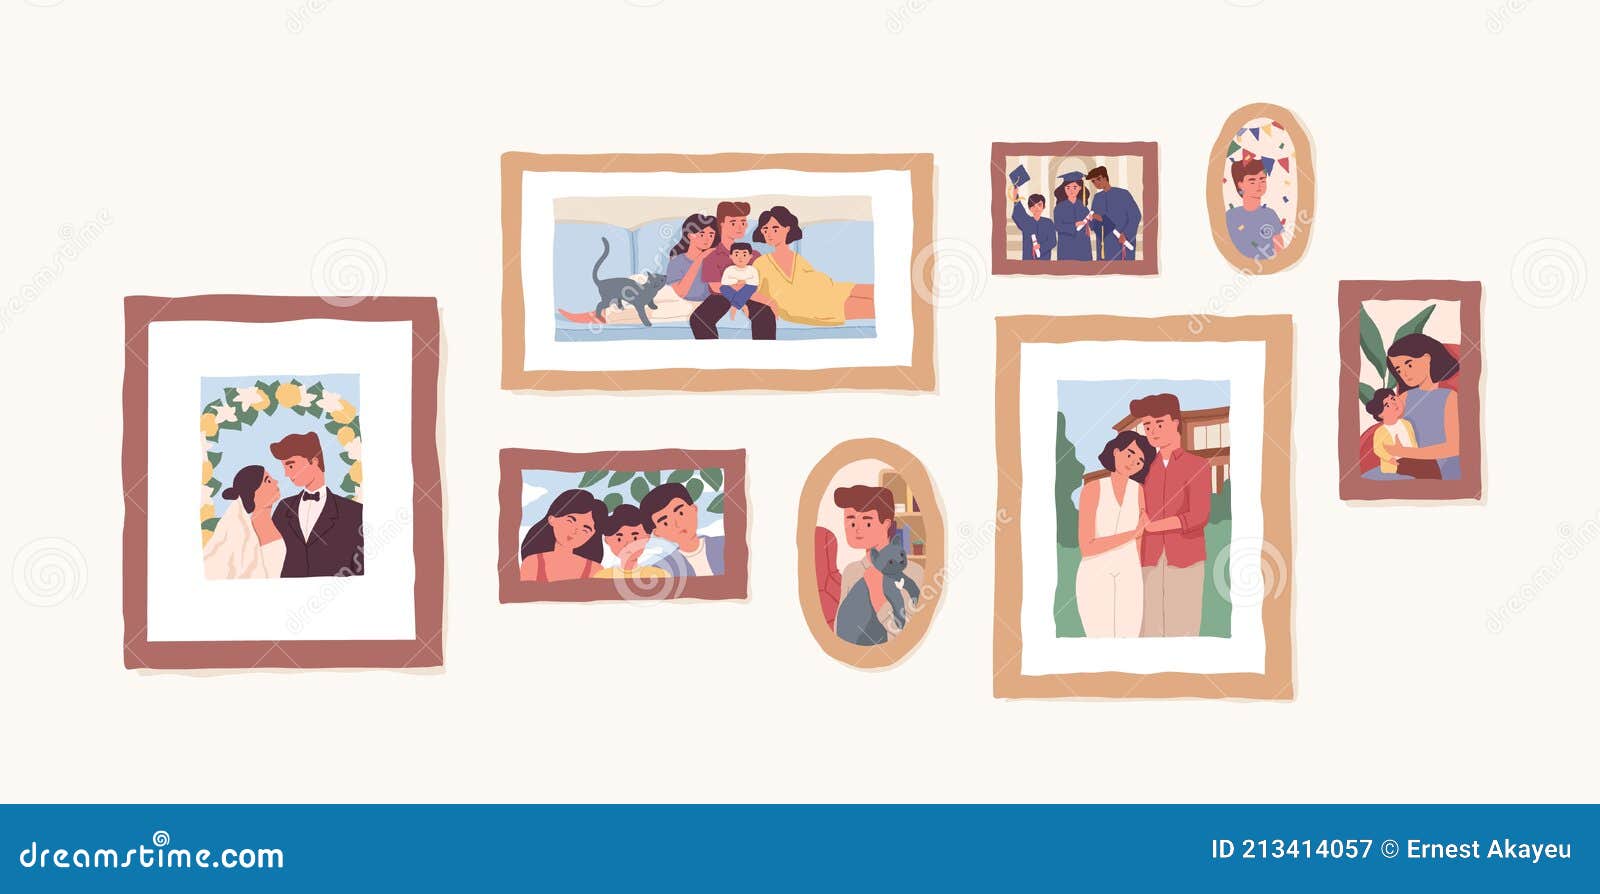 set of family photo portraits in frames. memorable pictures of happy parents and children at important moments and